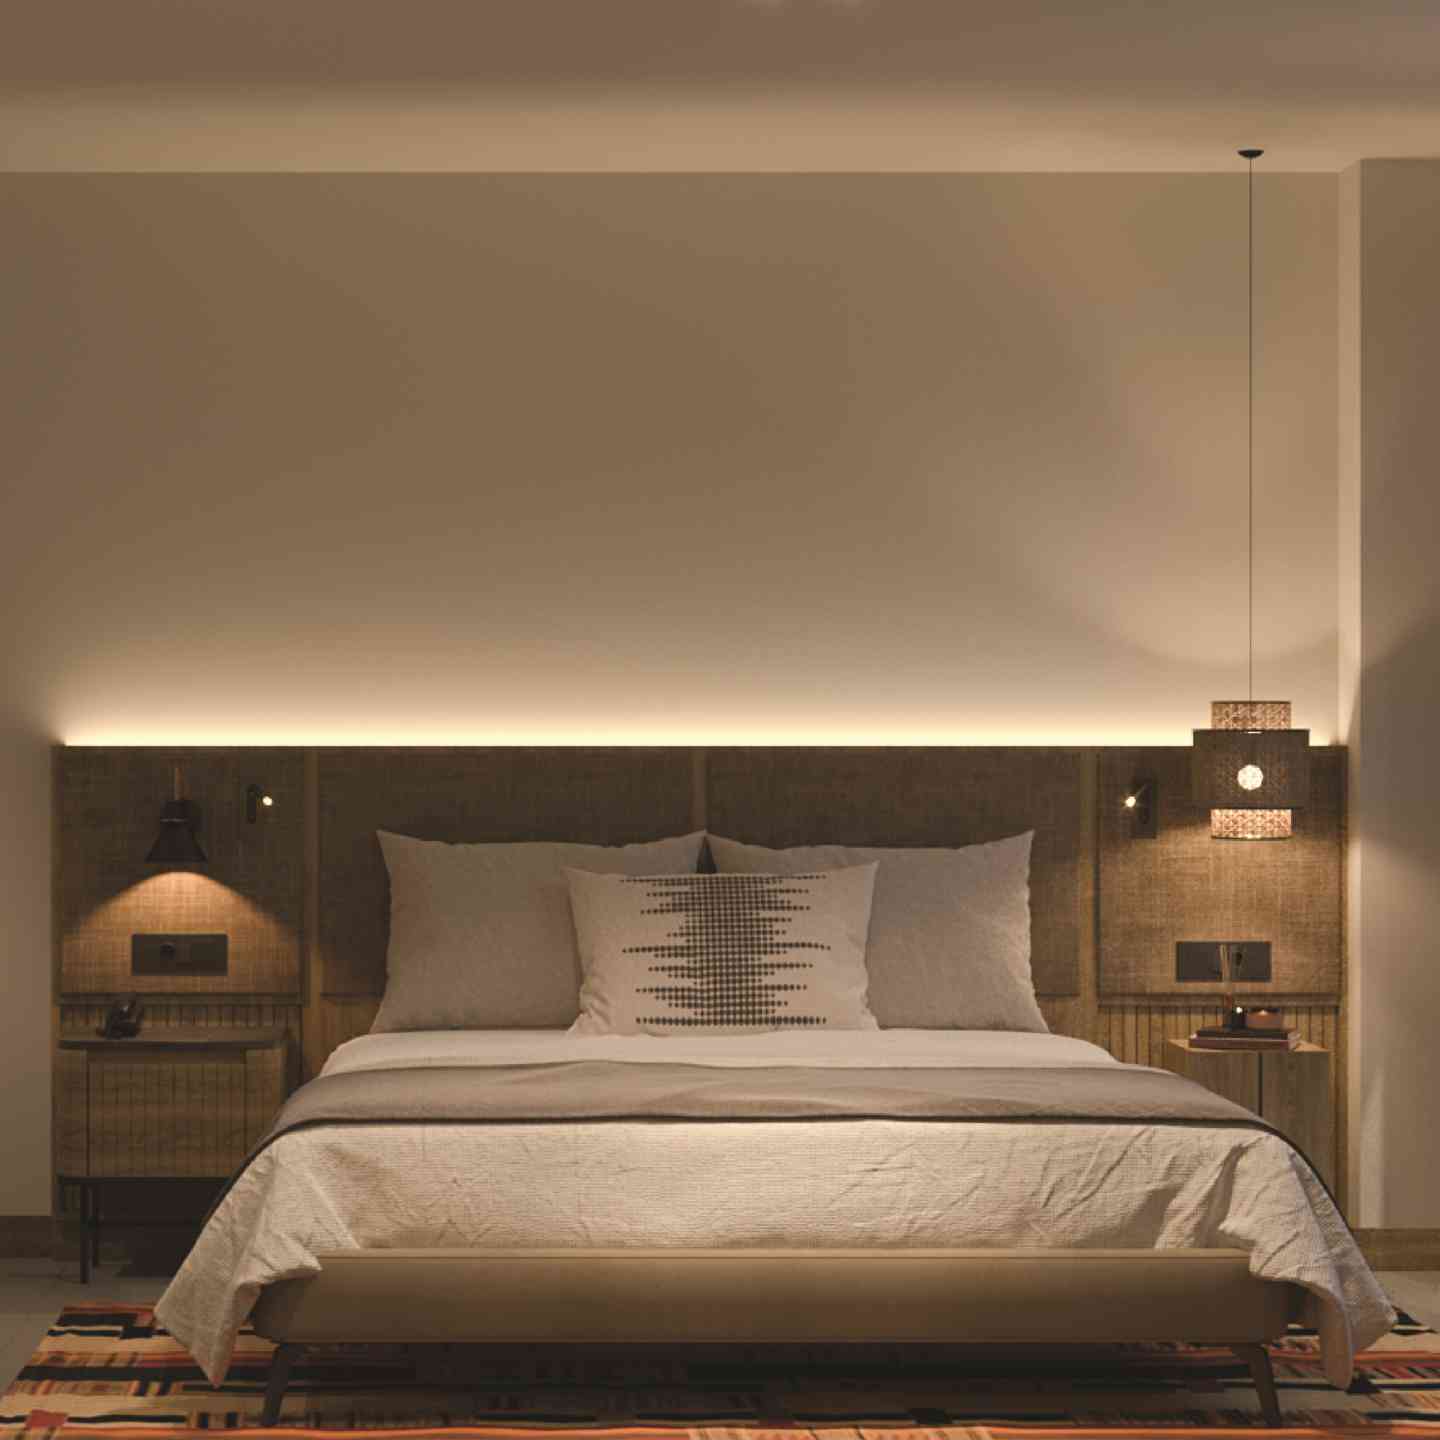 Large bed in beige bedding lit by soft lights with a large wooden headboard and beige wall